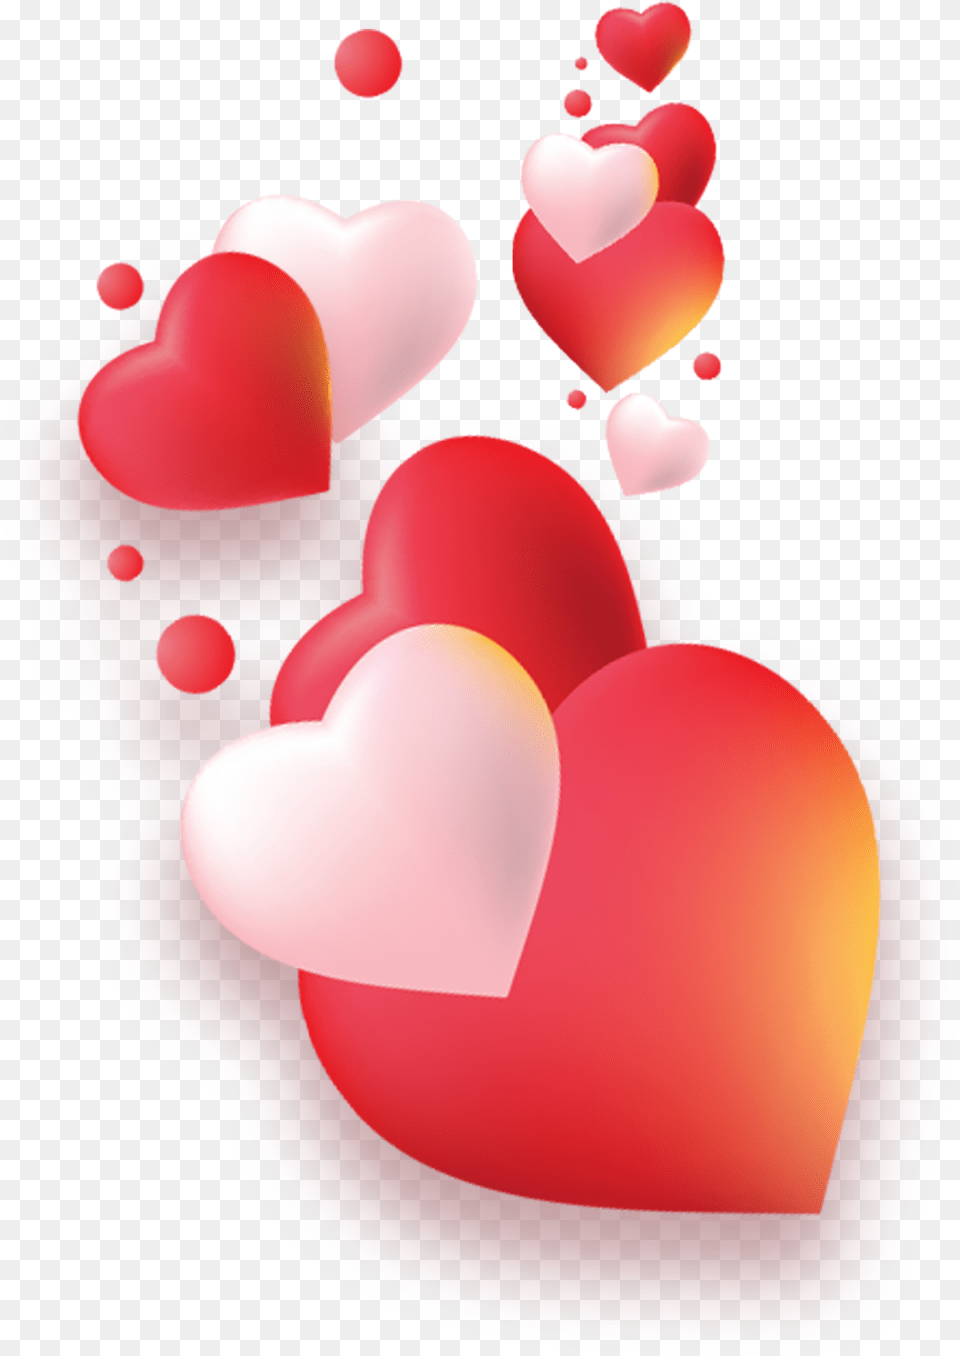 Heart Background Searchpngcom Hearts Clipart Transparent Background Pngheart, Birthday Cake, Cake, Cream, Dessert Free Png